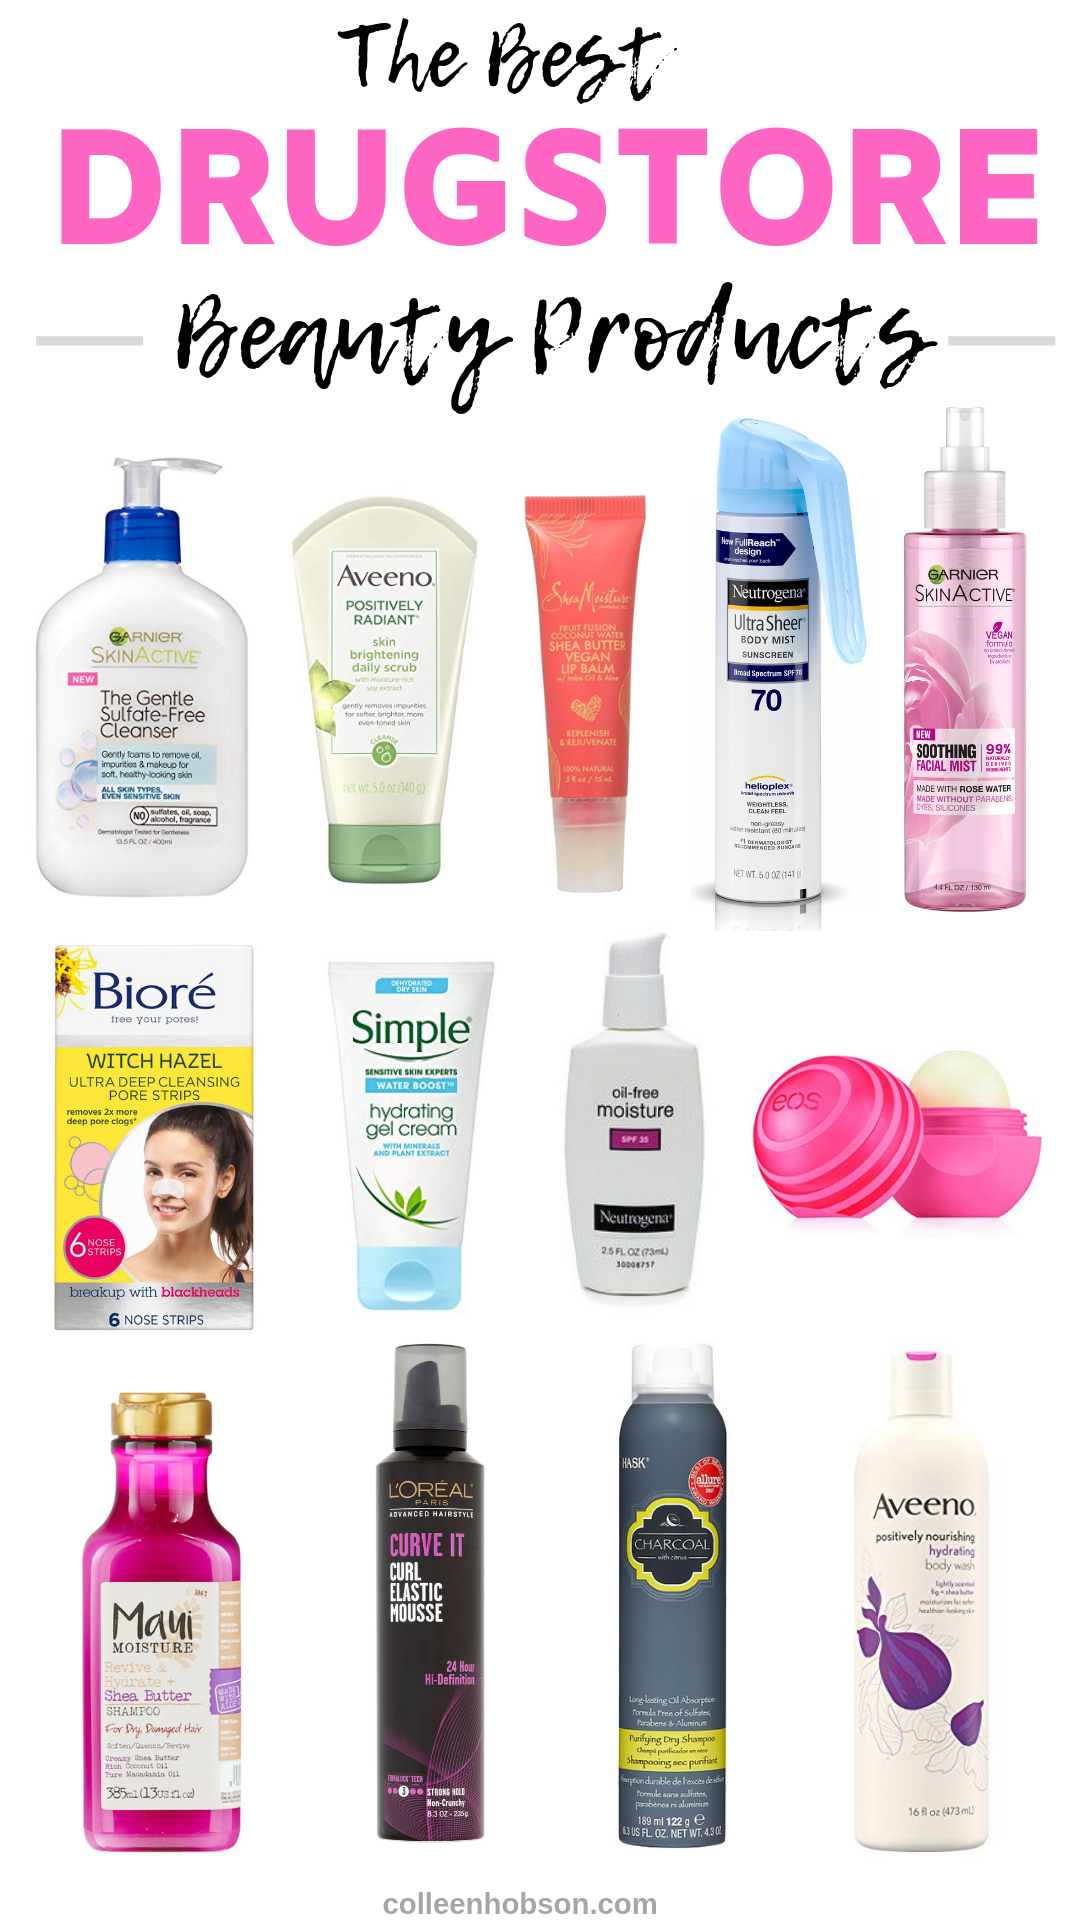 The Best Drugstore Beauty Products - The Best Drugstore Beauty Products -   19 top beauty Products ideas